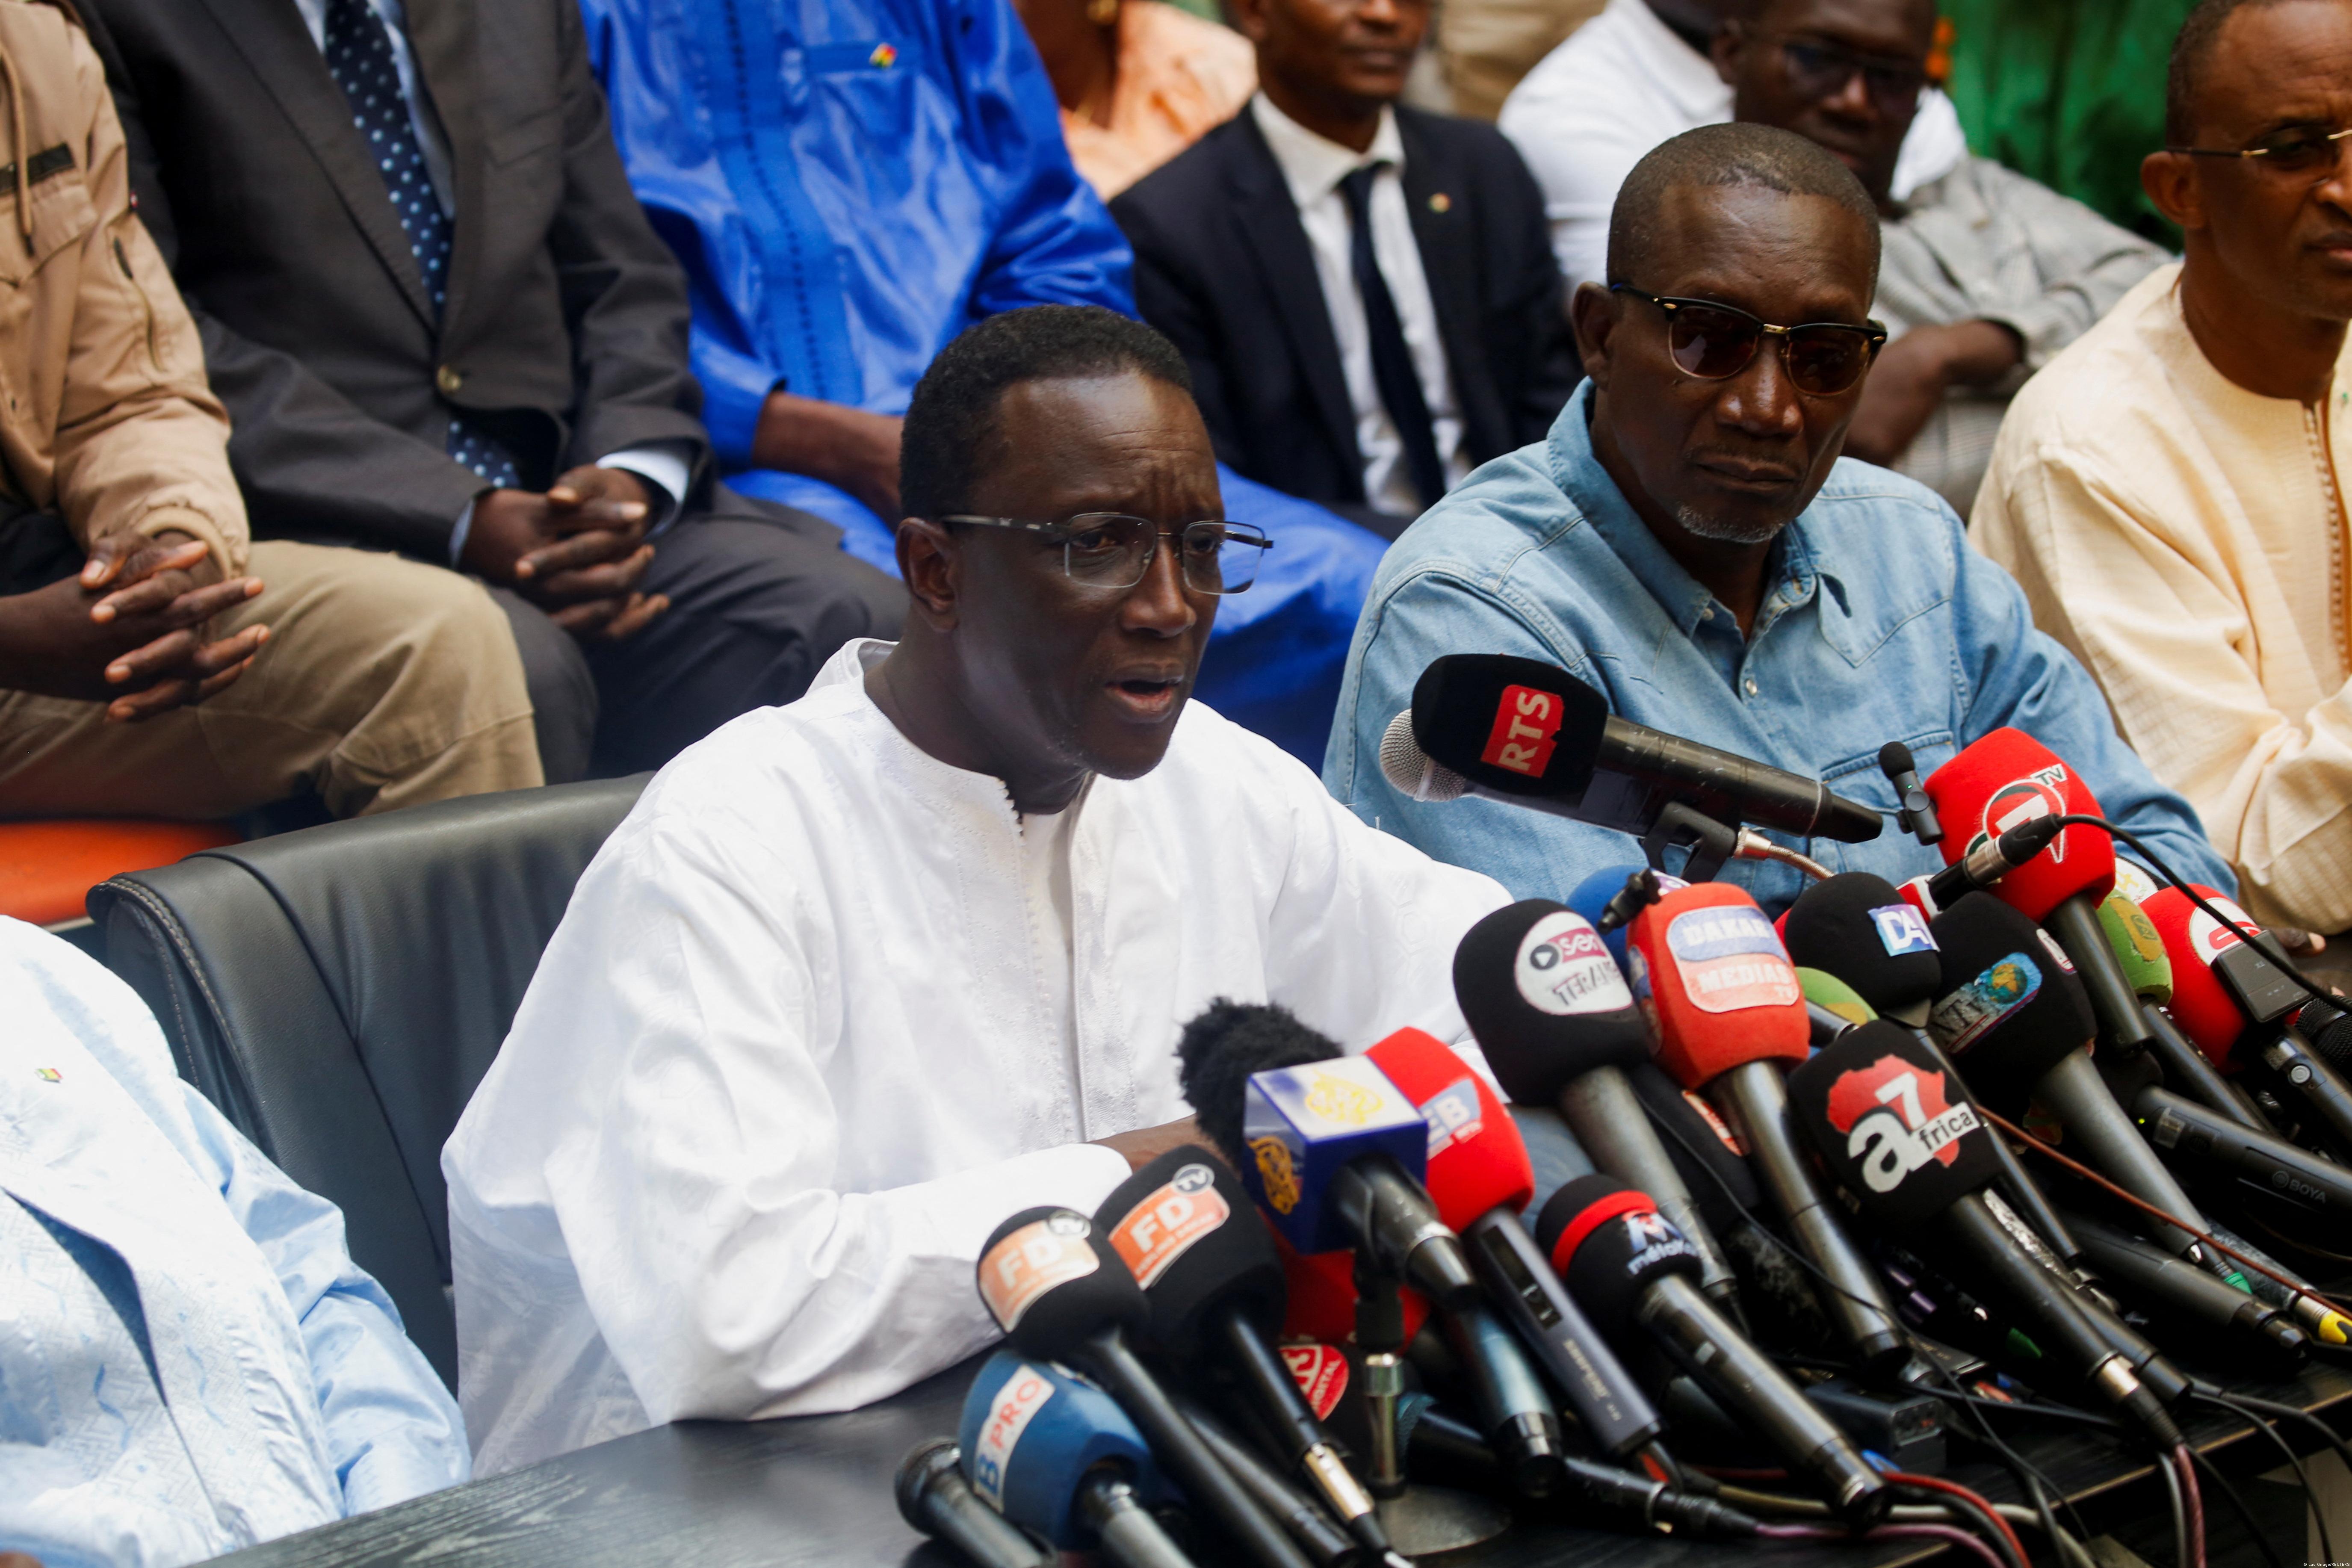 Ruling party candidate Amadou Ba conceded defeat after initially vowing to stay in the raceImage: Luc Gnago/REUTERS